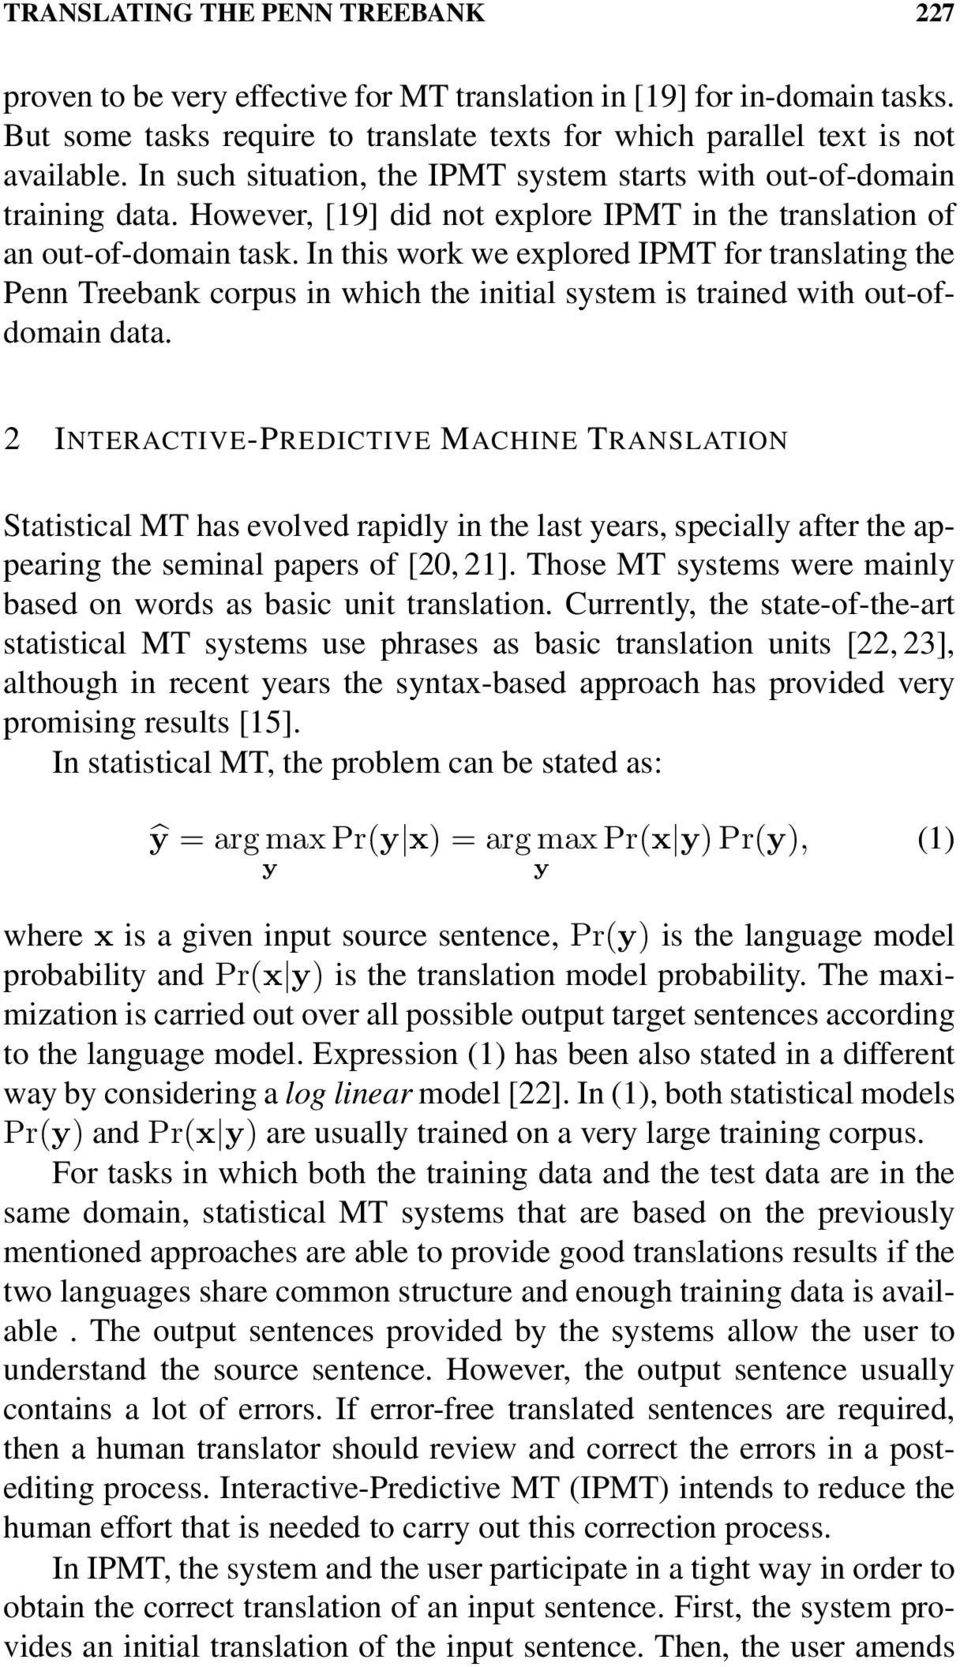 In this work we explored IPMT for translating the Penn Treebank corpus in which the initial system is trained with out-ofdomain data.